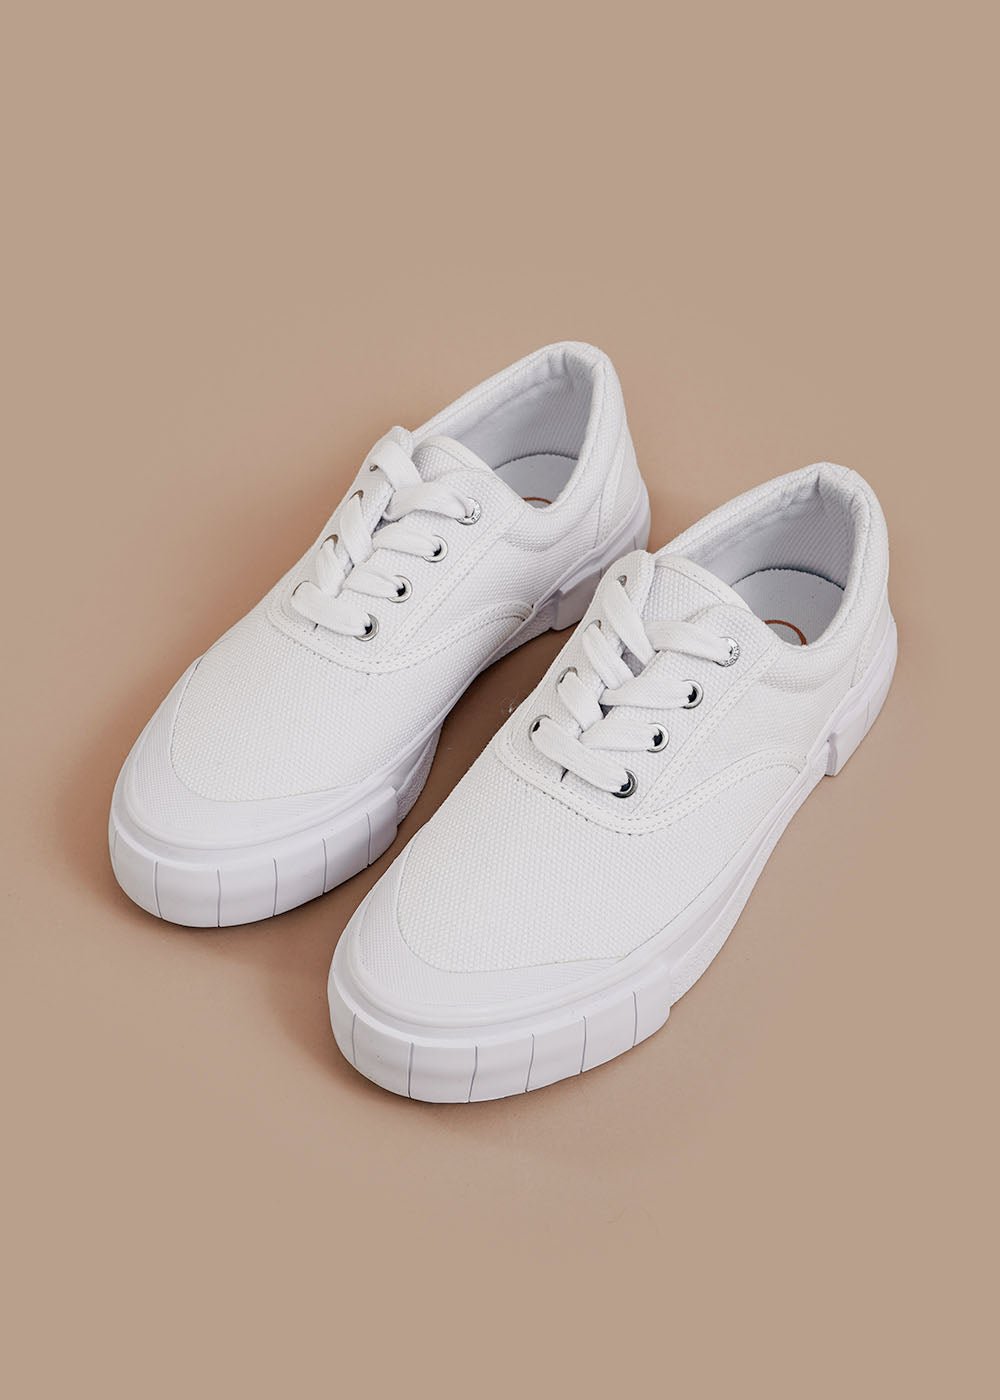 GOOD NEWS White Opal Core Sneakers - New Classics Studios Sustainable Ethical Fashion Canada